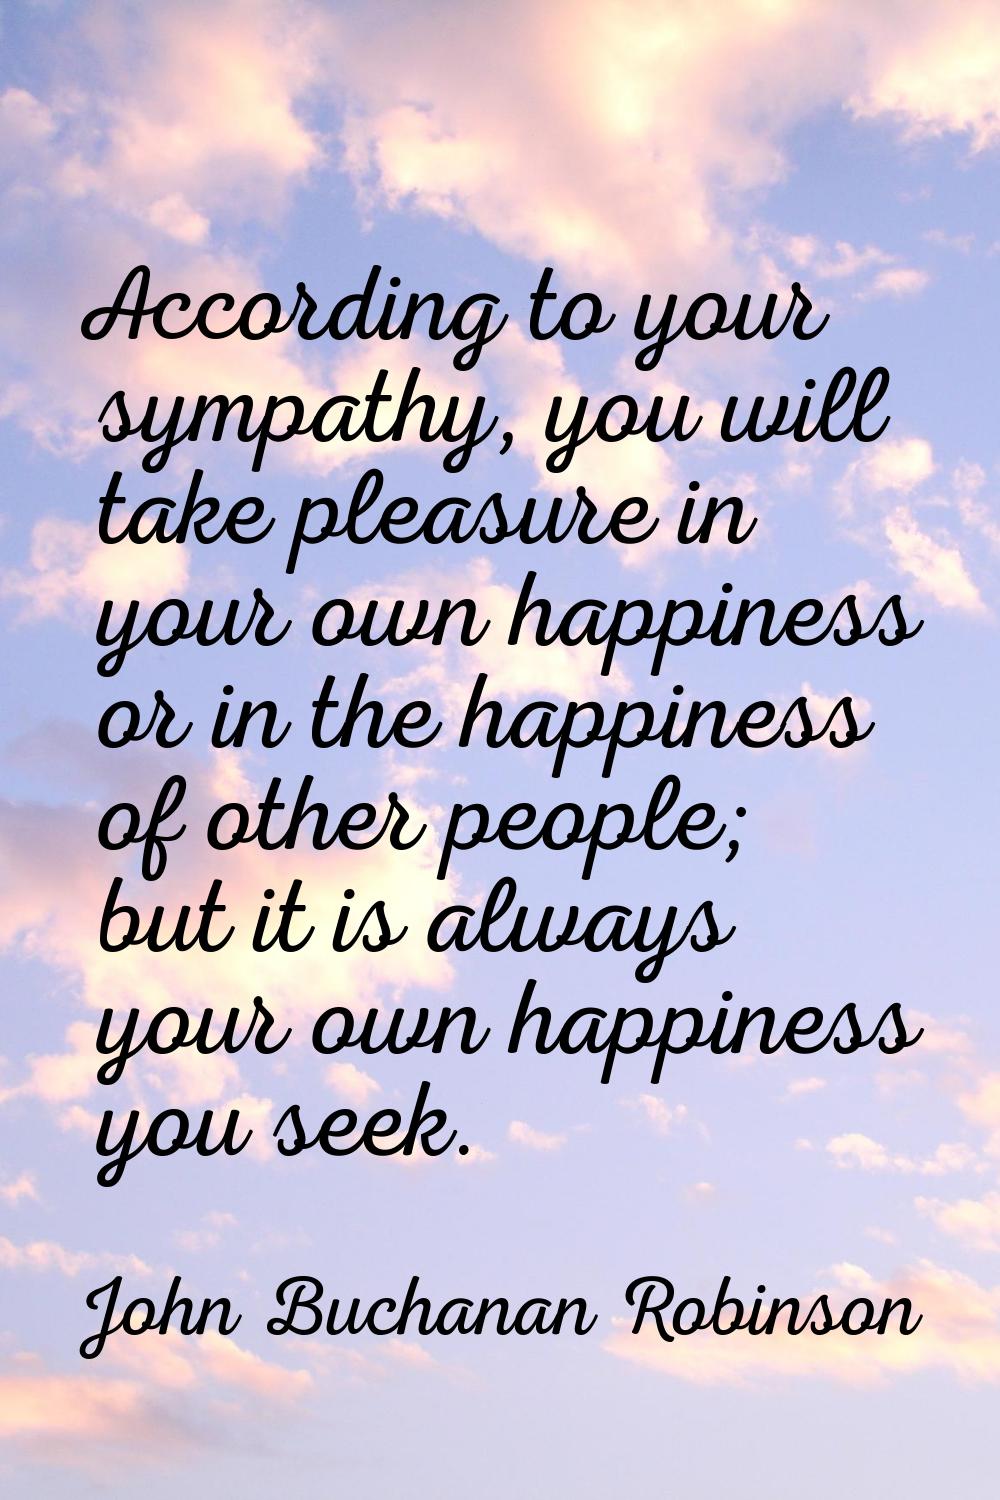 According to your sympathy, you will take pleasure in your own happiness or in the happiness of oth